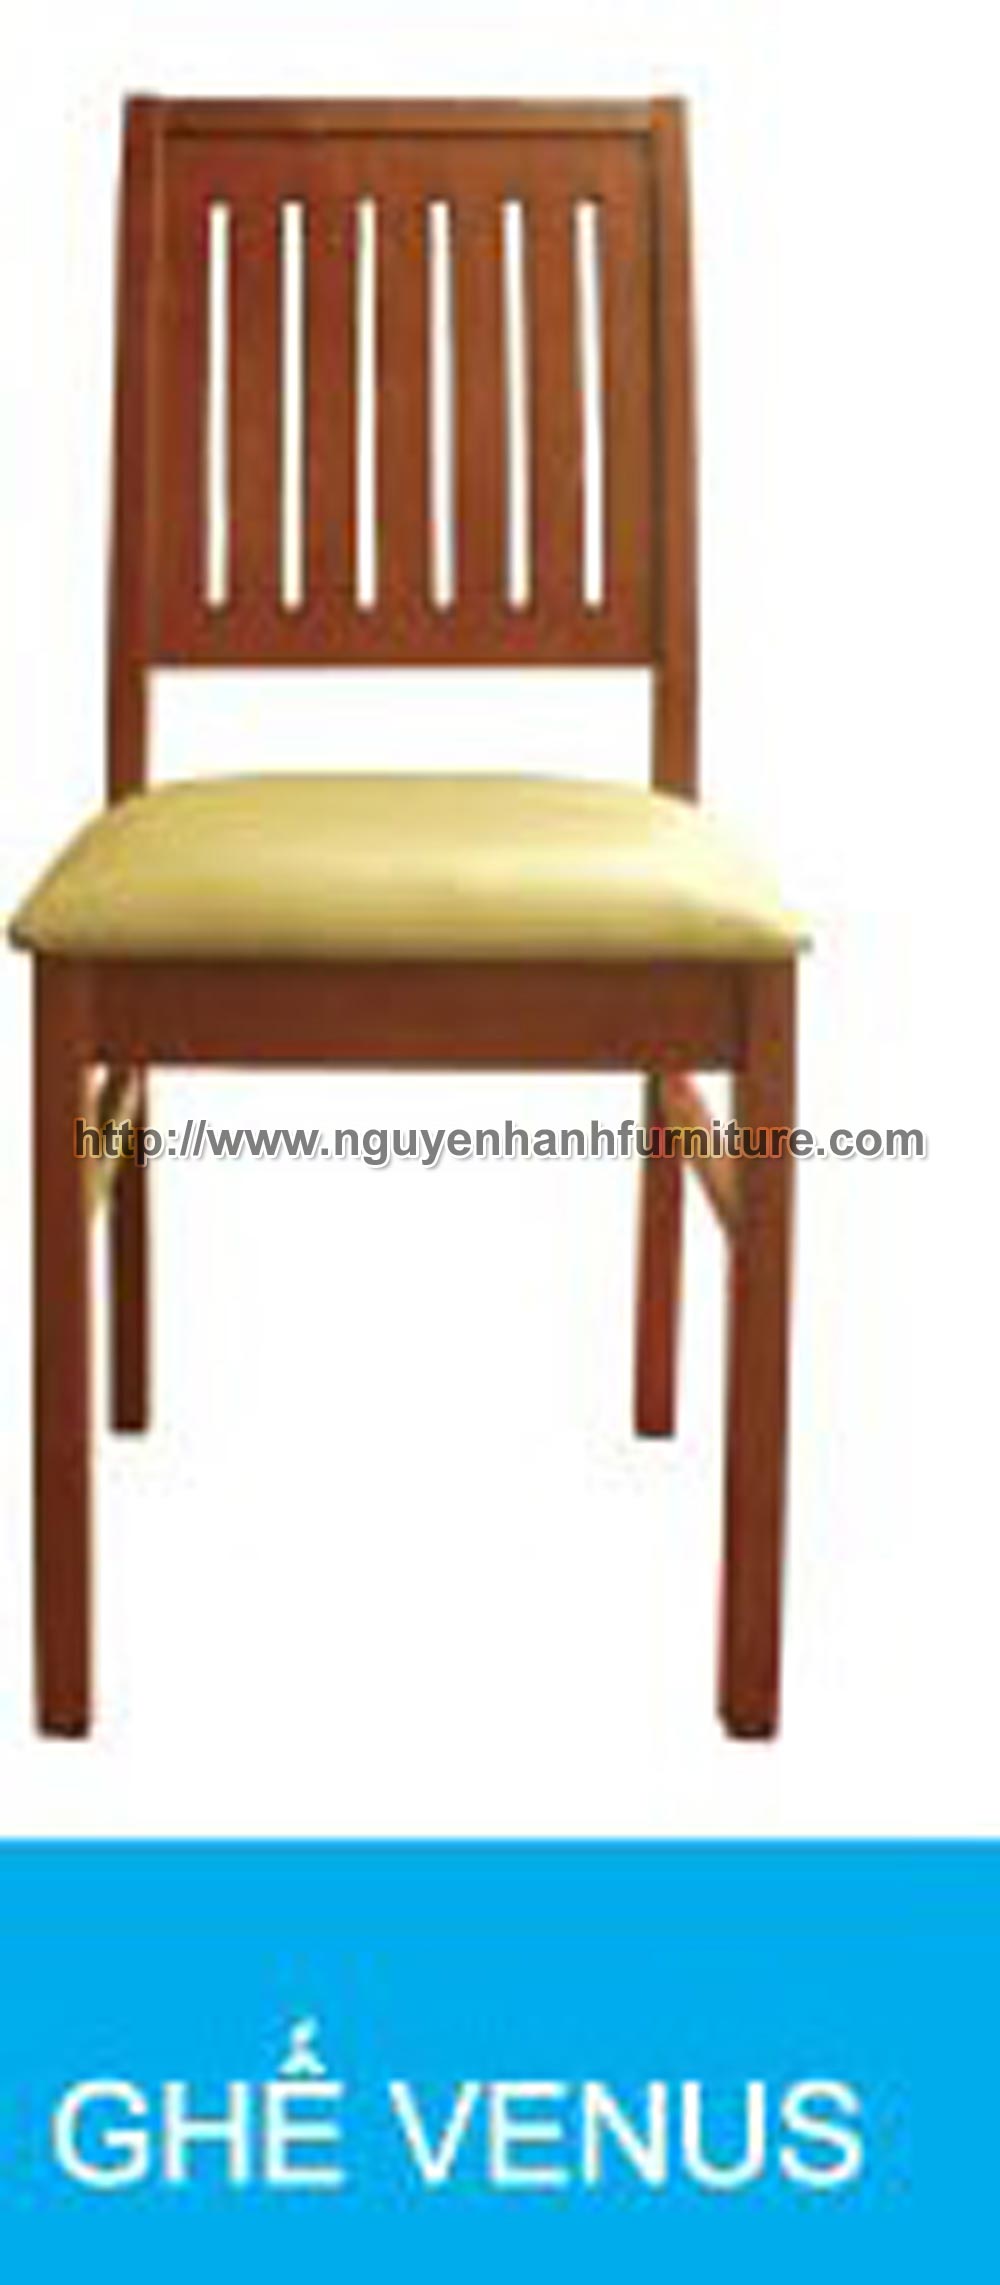 Name product: Venus chair with mattressed surface